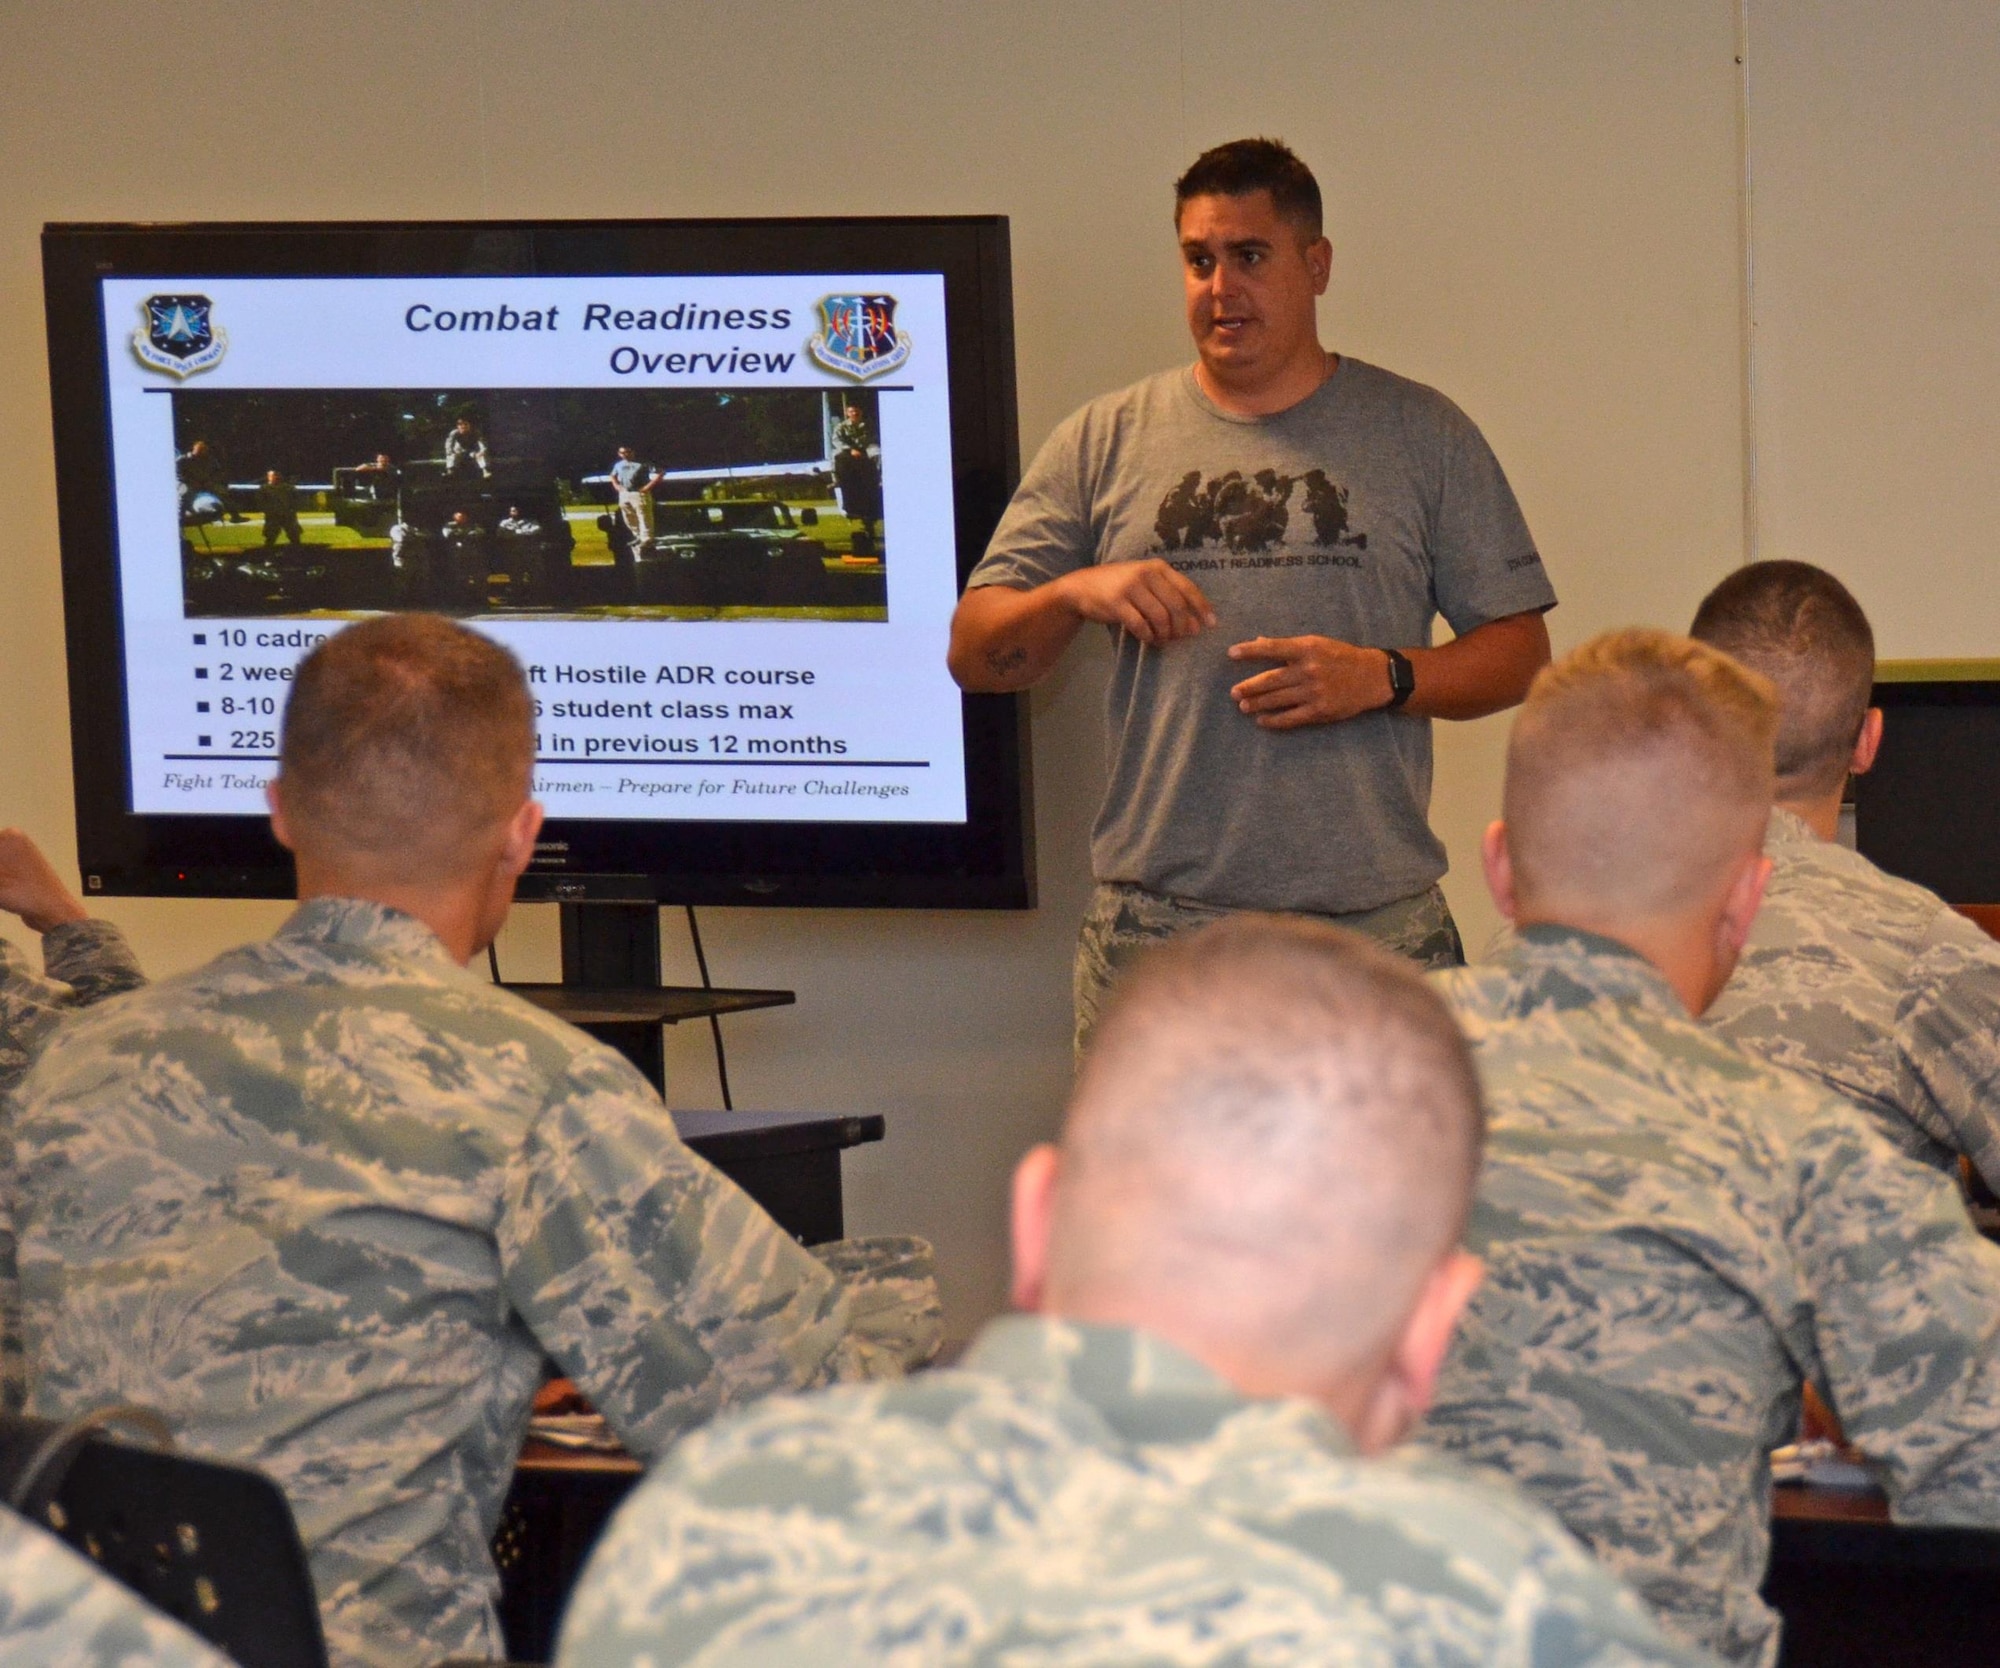 Instructor Tech. Sgt, Ryan Petersen, 5th Comabat Communications Squadron Support, gives combat readiness training to twenty-five 2nd Lieutenants at Robins Air Force Base, Georgia, July 25, 2016. Chaplain candidates and members of the Catholic church attend Sunday morning worship in the base chapel at Robins Air Force Base, Georgia, July 25, 2016. The candidates are participating in the Air Force Reserve Command Chaplain Candidate Intensive Interview program which aims to provide an extensive overview of what the Air Force Reserve mission is as well as a broad overview of the military chaplain corps. During the last week of the program, the candidates were immersed in fast-paced mobility training conducted by active-duty instructors from the 5th Combat Communications Squadron Support. (U.S. Air Force photo/Tech. Sgt. Kelly Goonan)